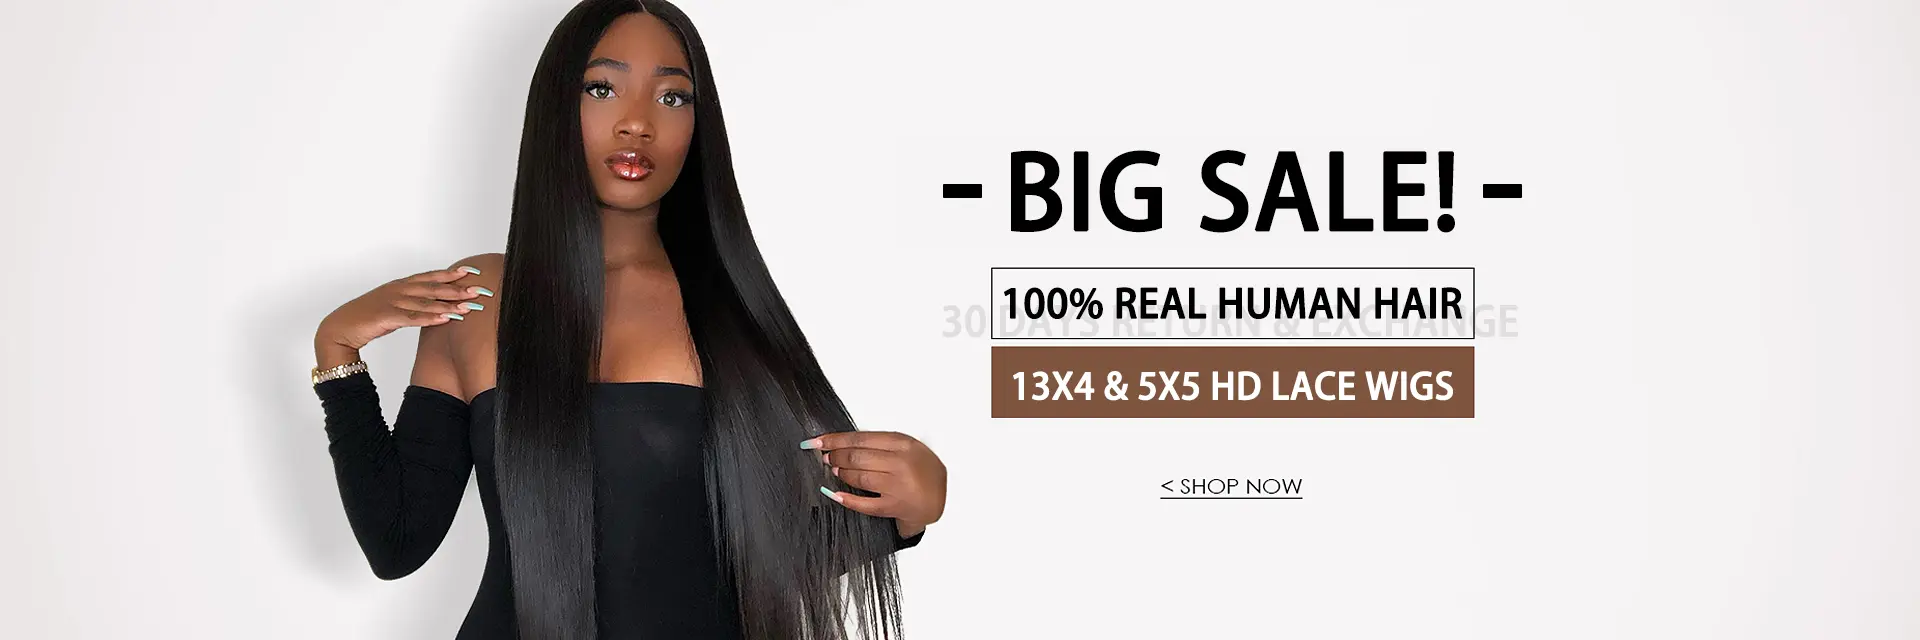 13×4 and 5×5 HD lace wigs on sale